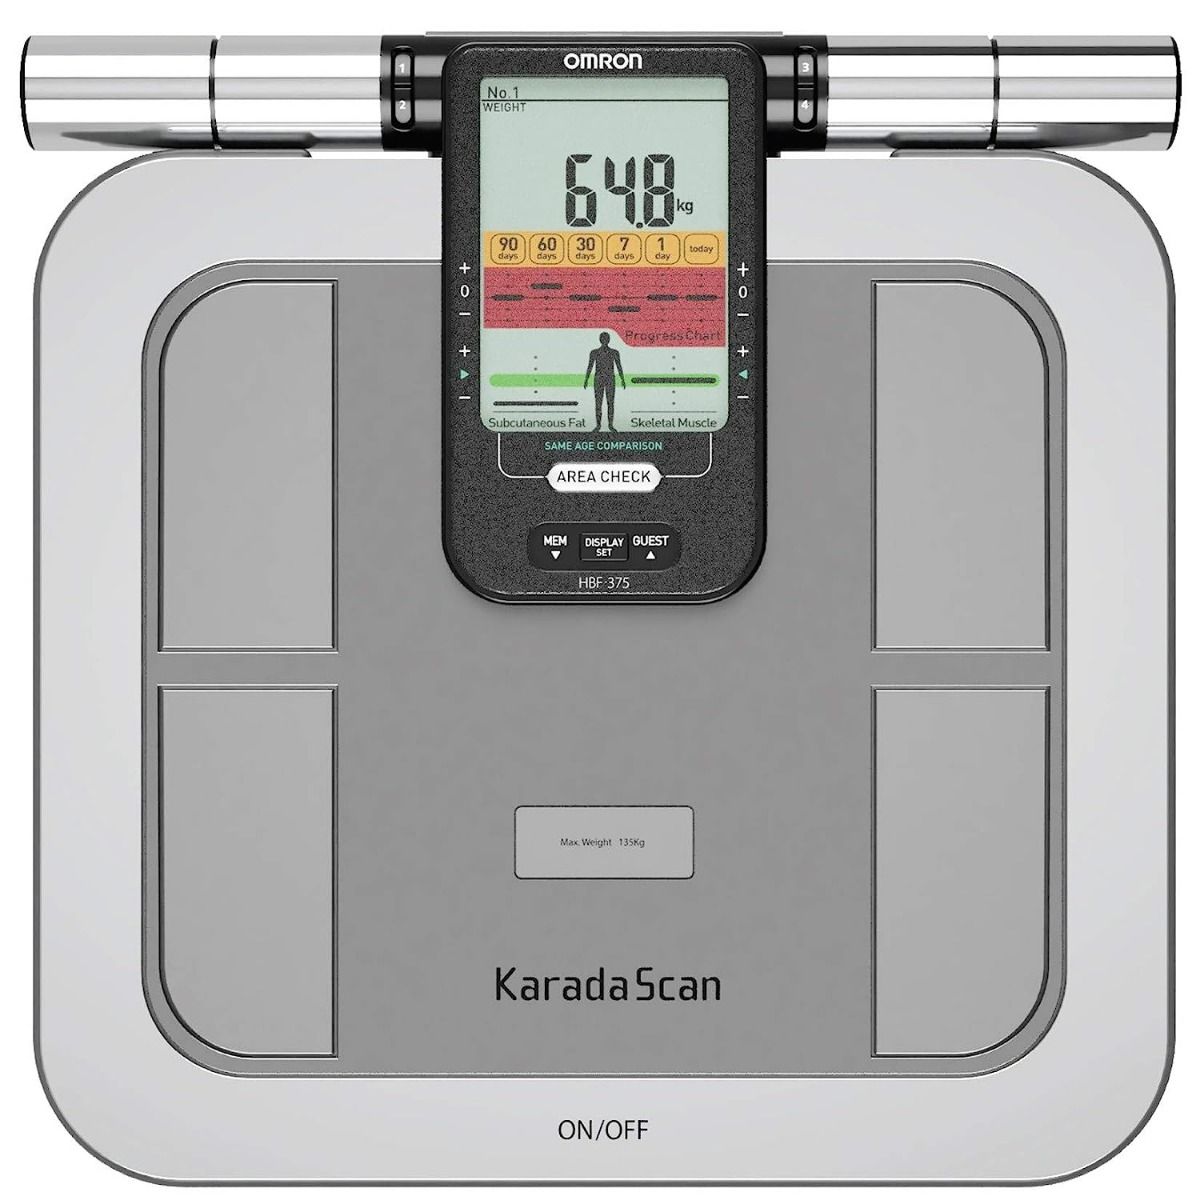 Omron Karada Scan Body Composition Monitor HBF-375, 1 Count, Pack of 1 